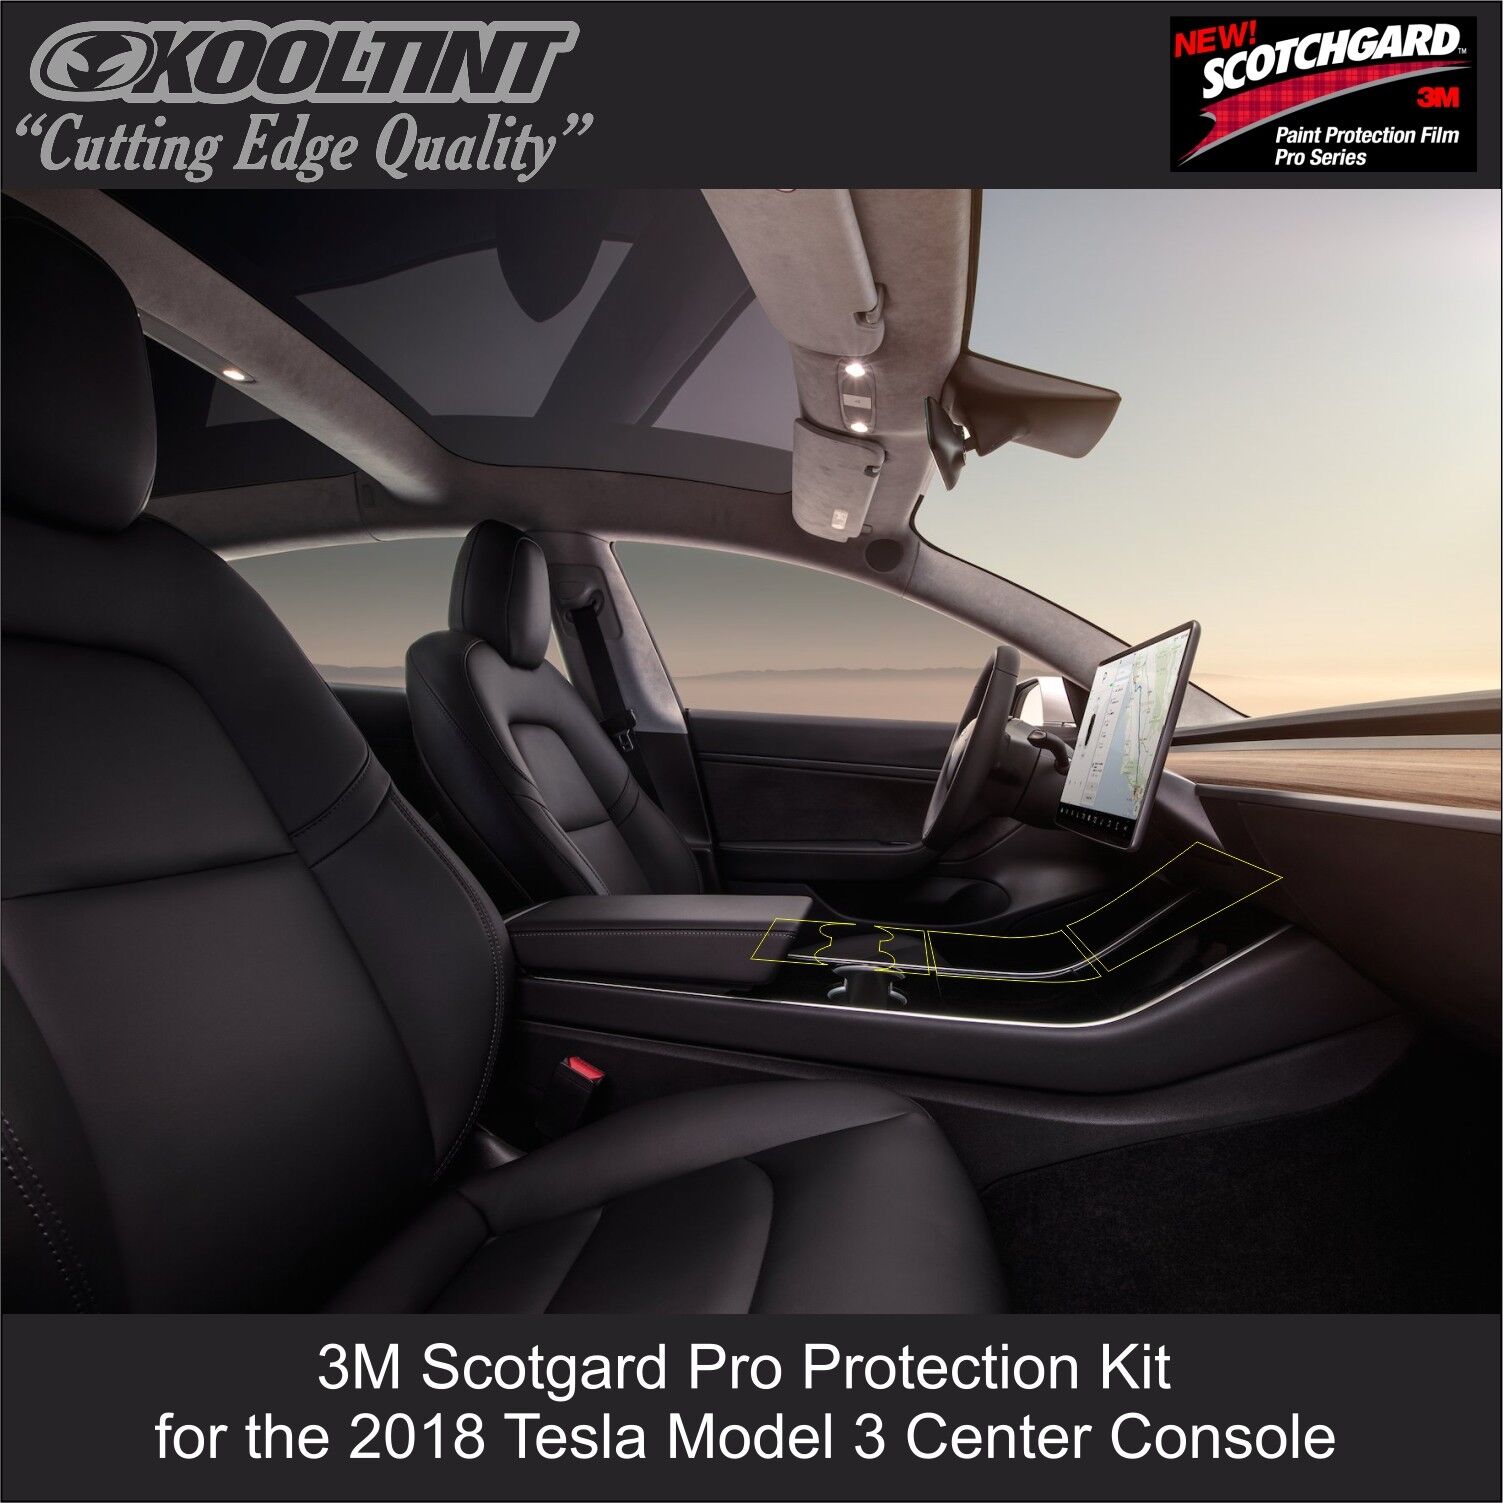 Tesla Model 3 Center Console Protection Kit by 3M